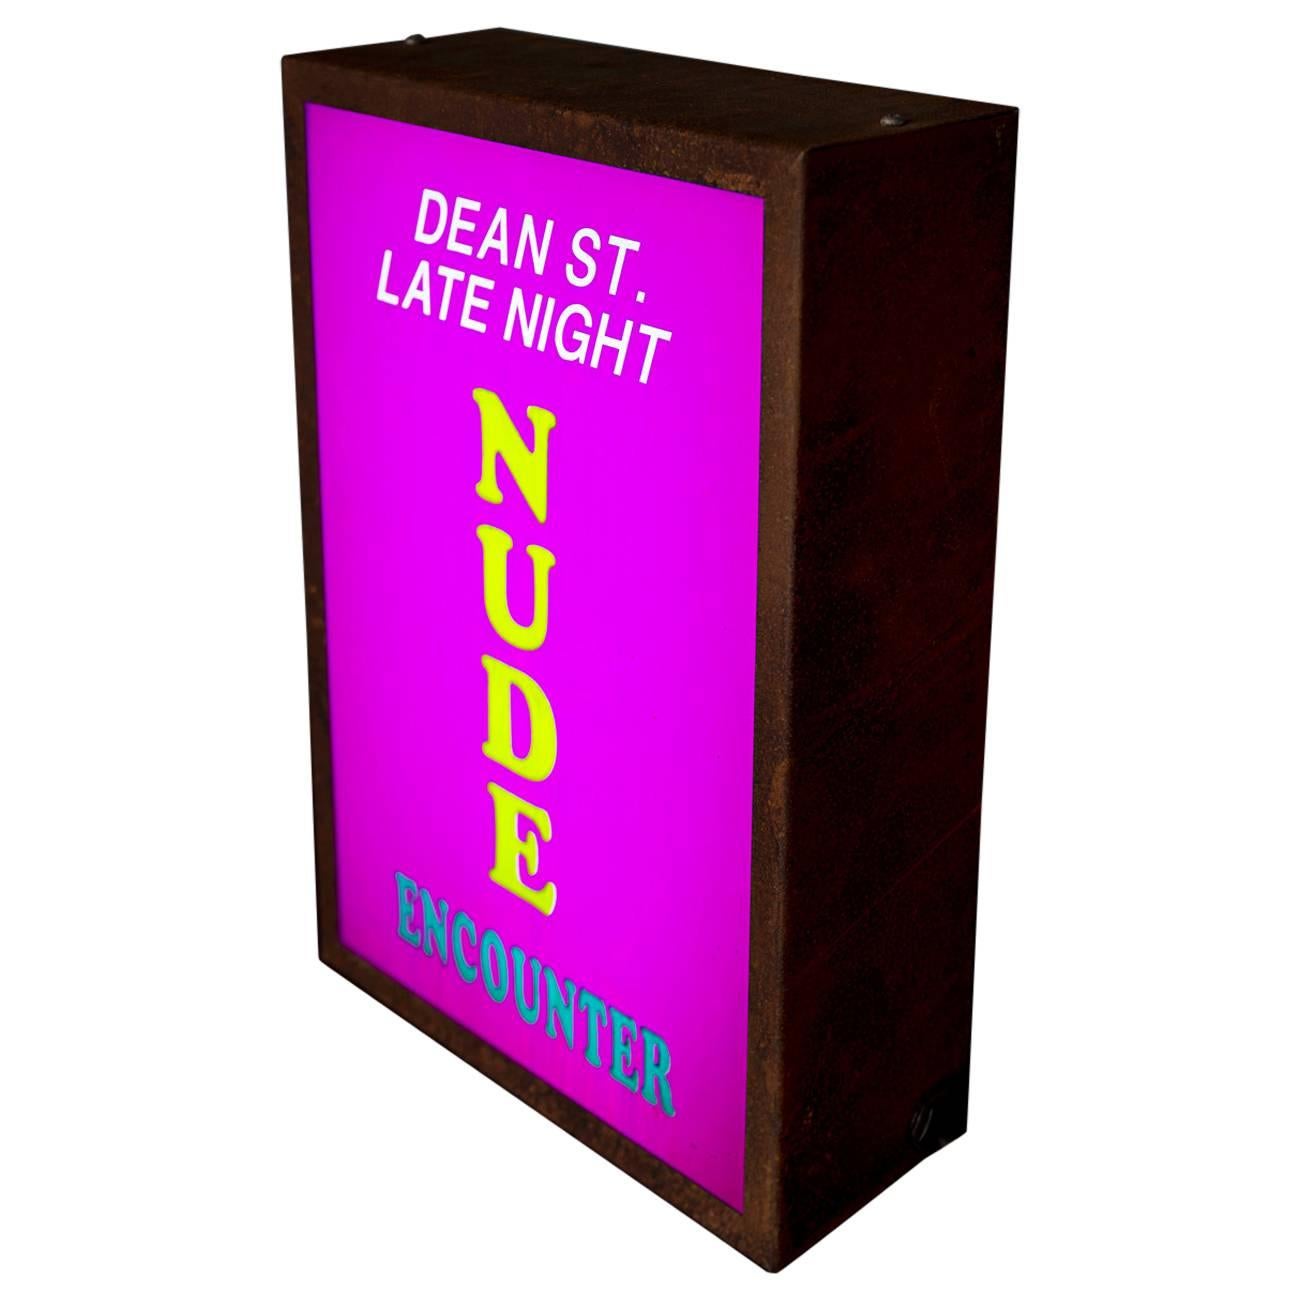 "Dean St. Late Night Nude Encounter" Vintage Light Box For Sale